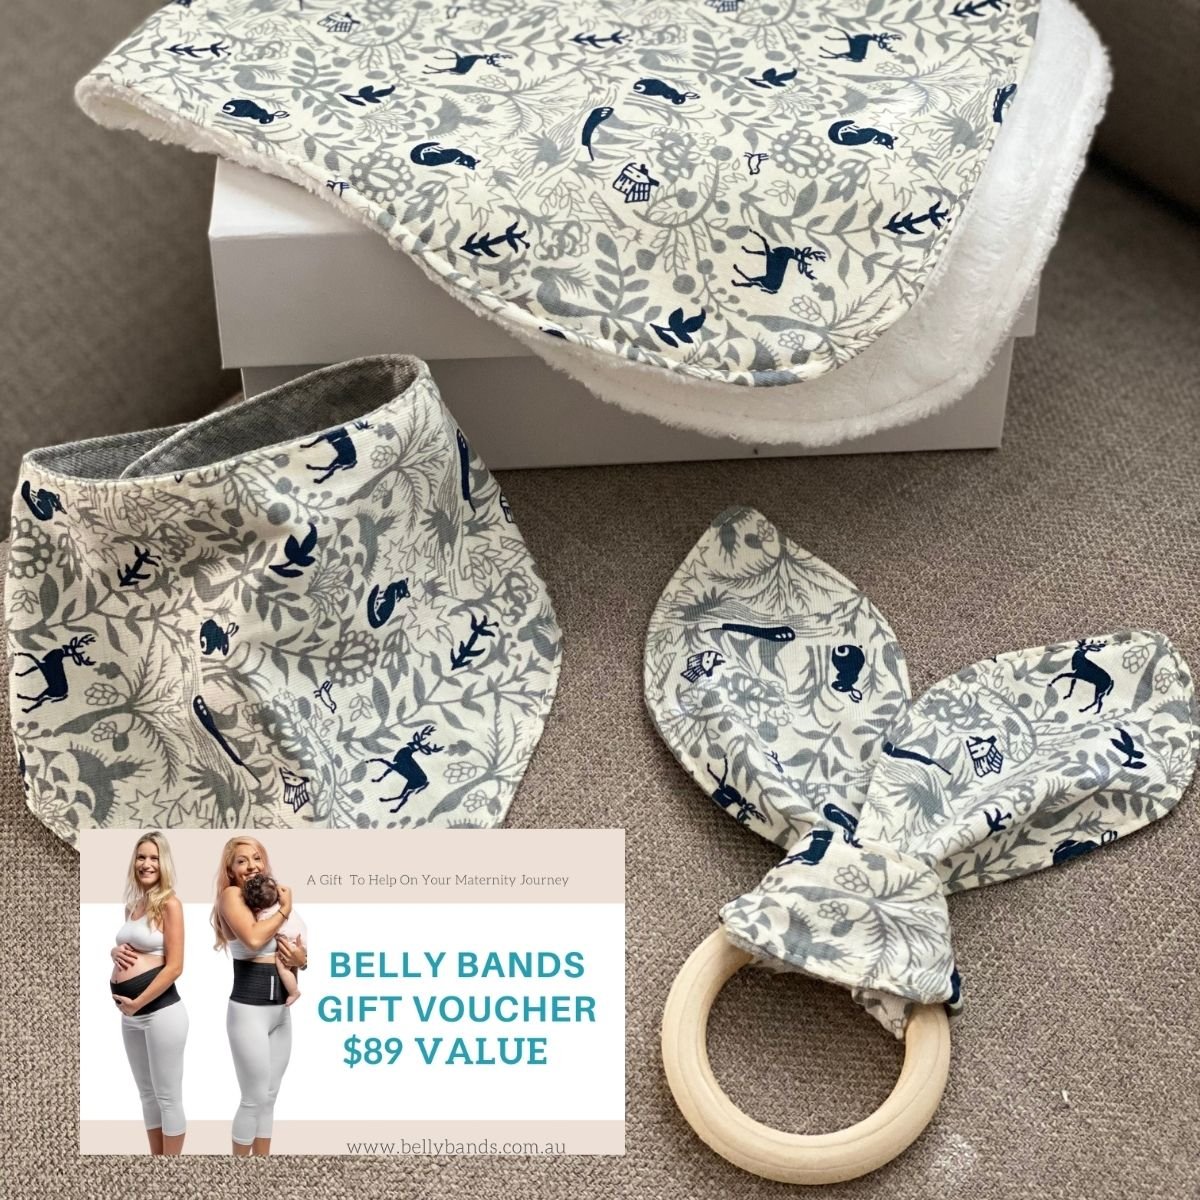 Gift Cards and Baby Shower Gifts - Belly Bands